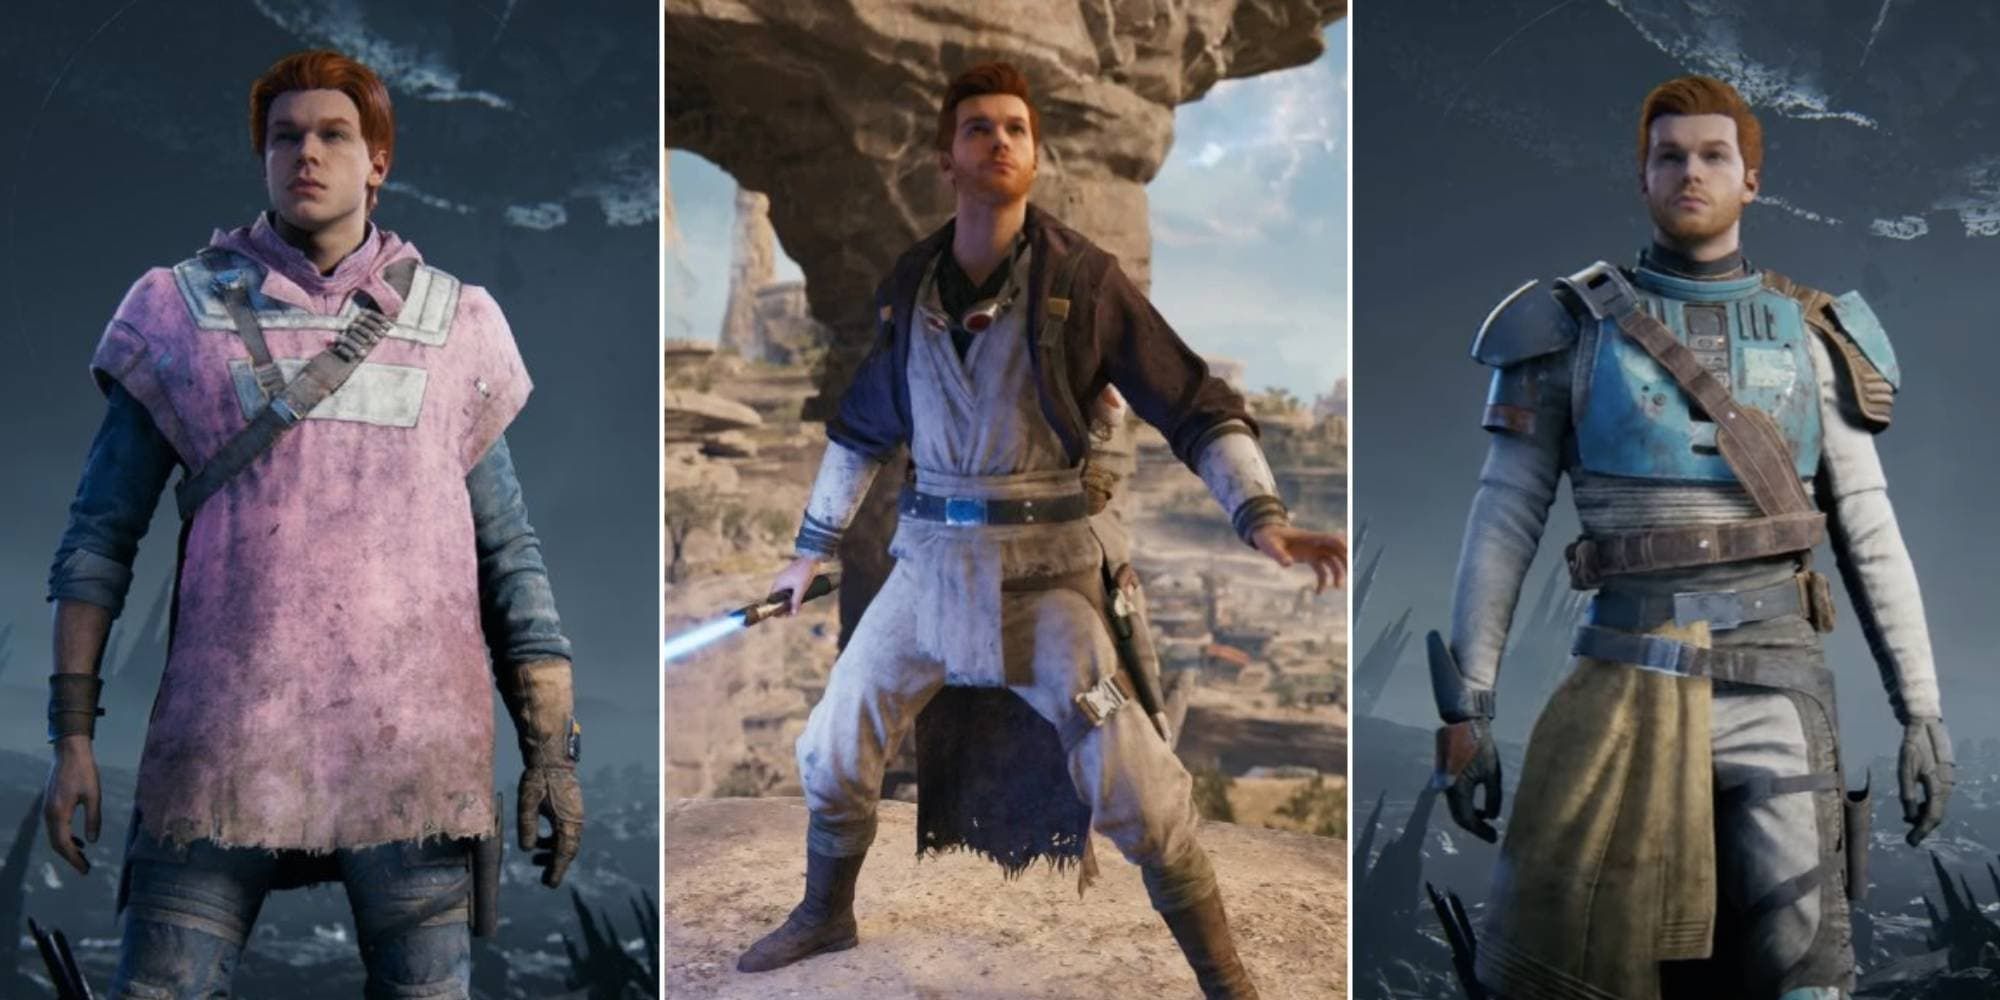 Cal Kestis wears the Poncho, Hermit, and Commander outfits in Star Wars Jedi: Survivor.